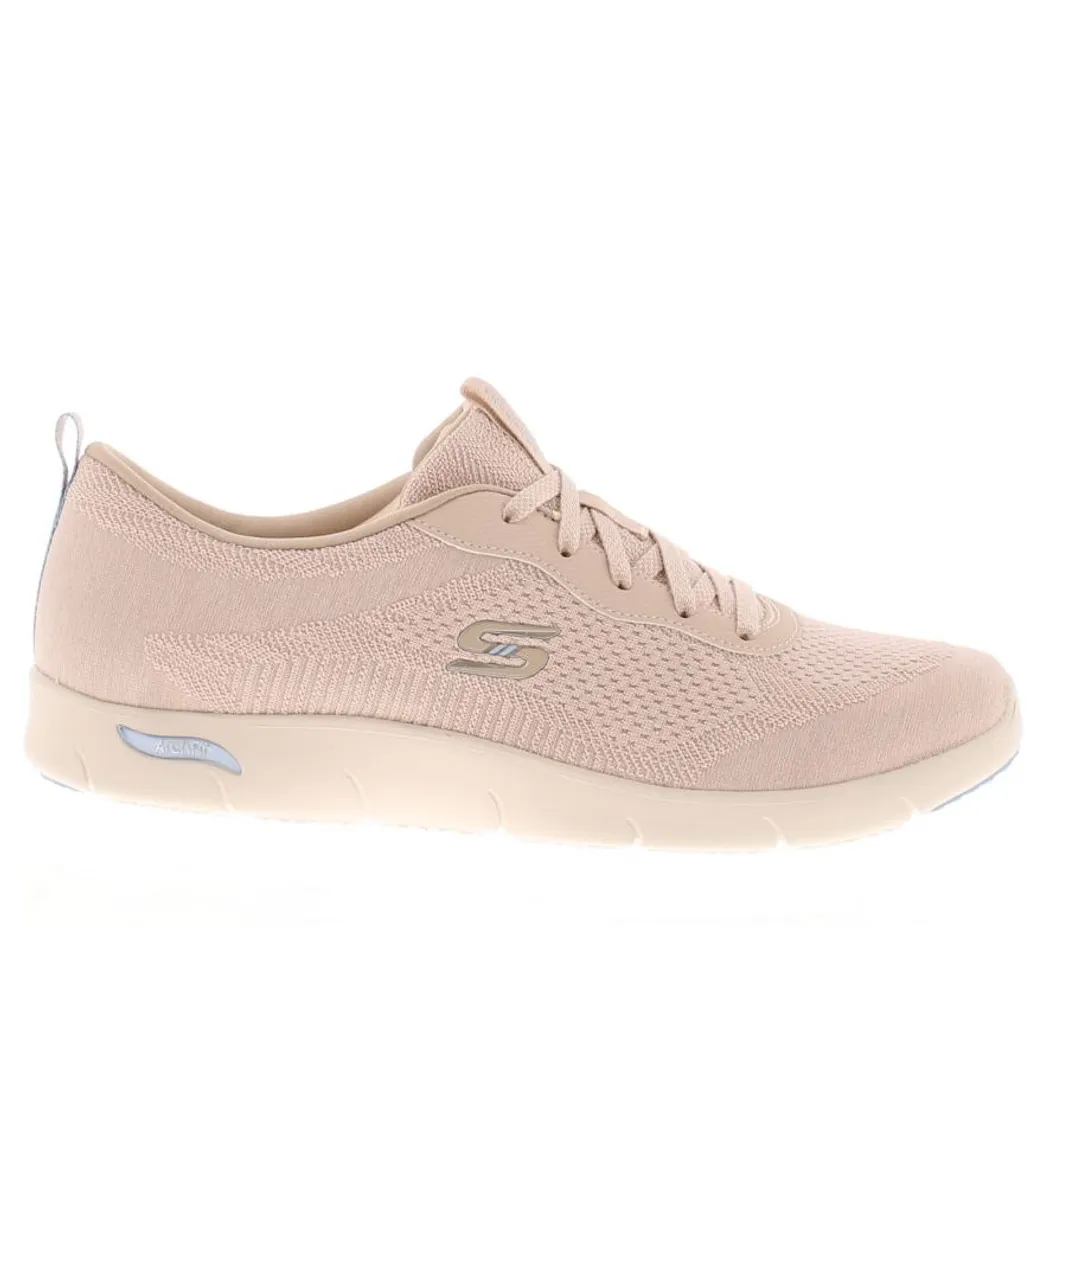 Skechers Womens Trainers Arch Fit Refine Lavi Lace Up taupe - Beige Textile